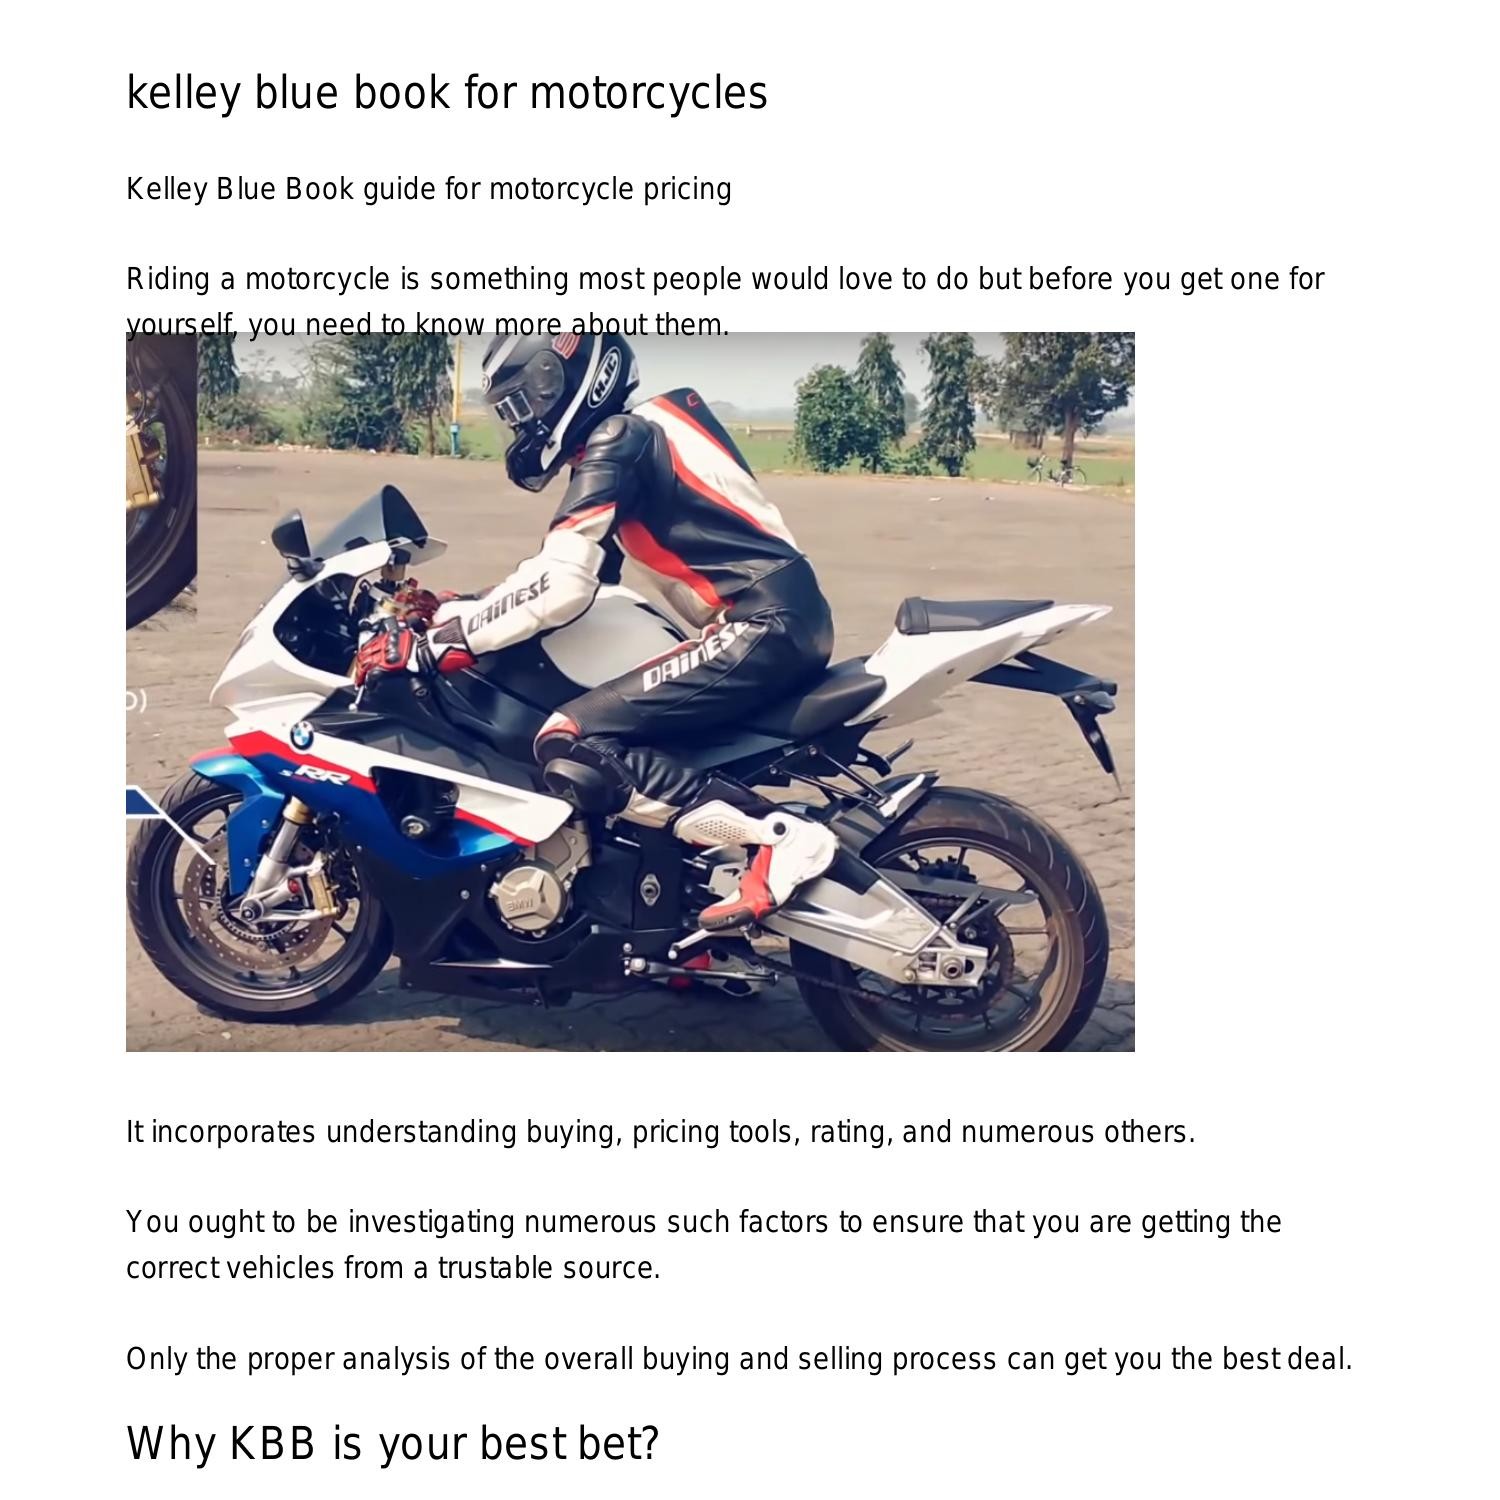 Kelley Blue Book guide for motorcycle pricingfhmbo.pdf.pdf DocDroid